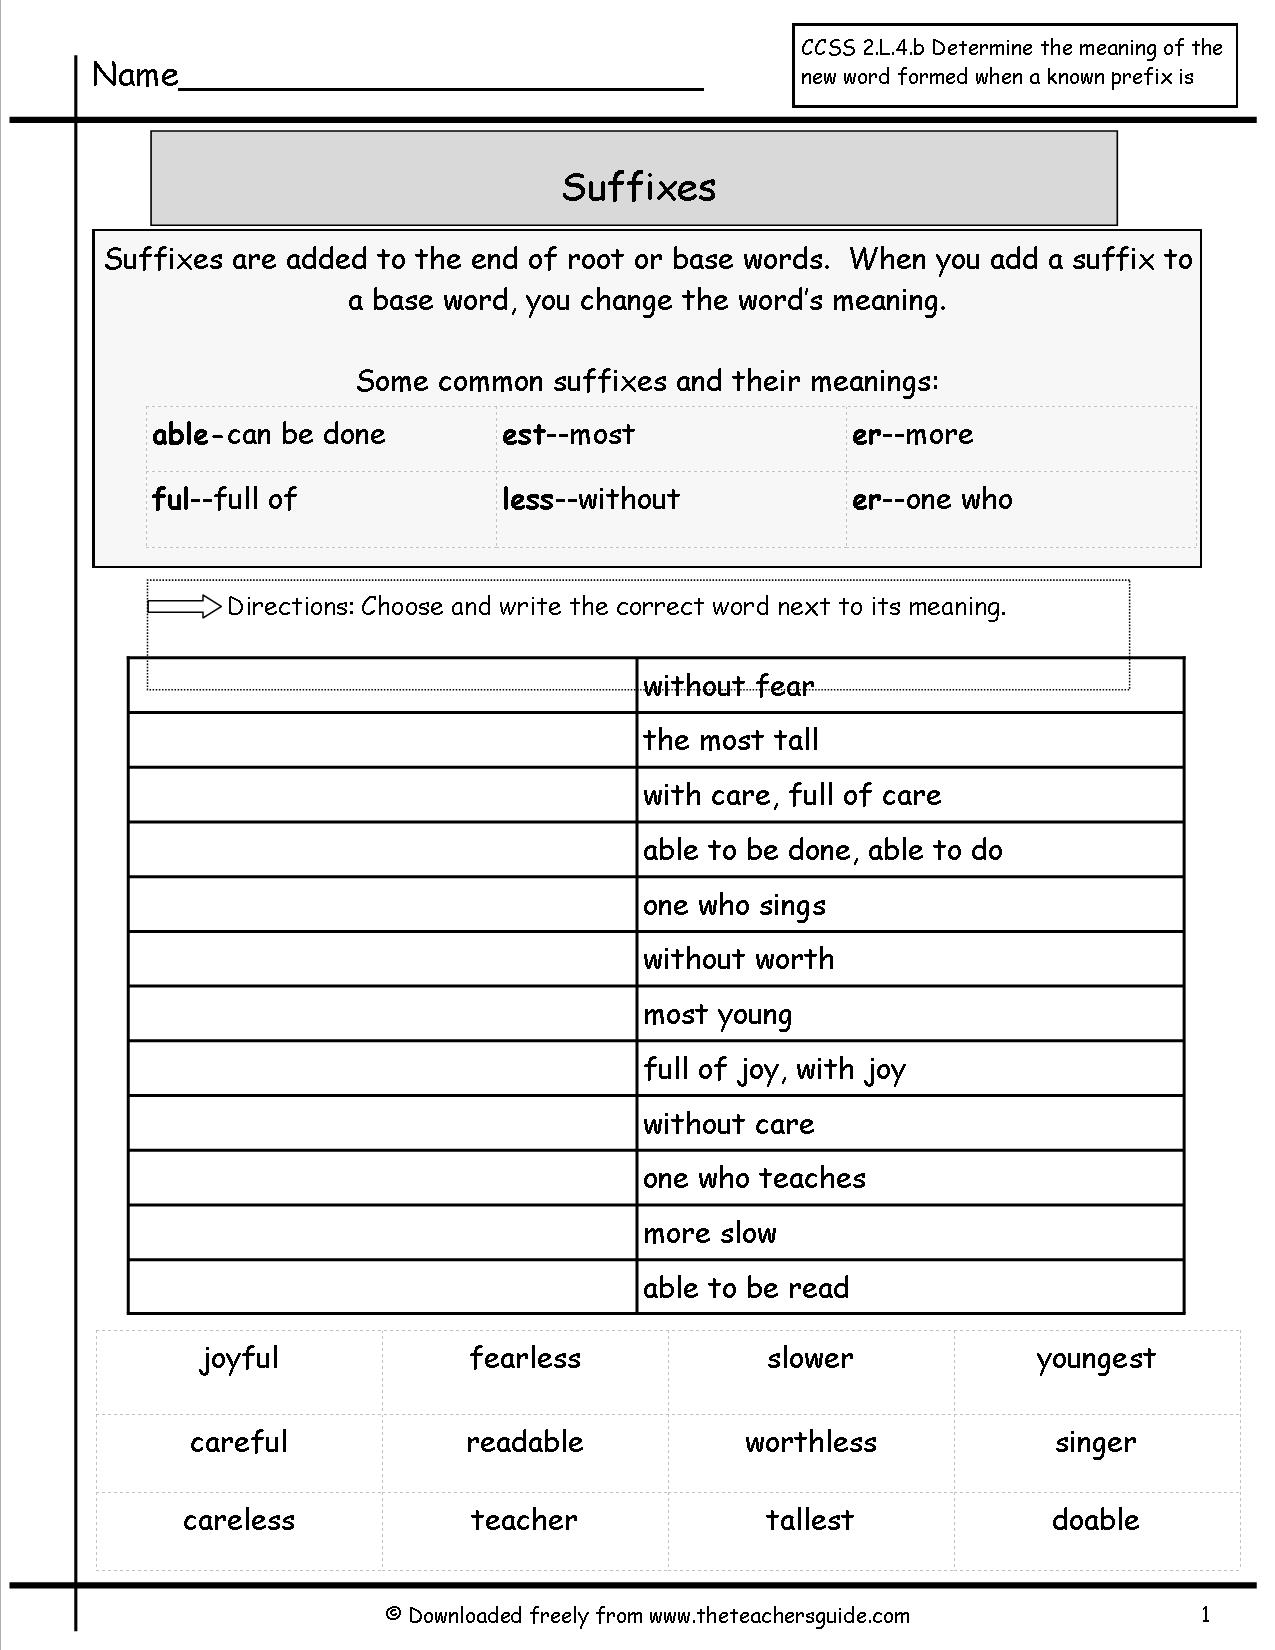 Prefixes and Suffixes Worksheets 4th Grade Image